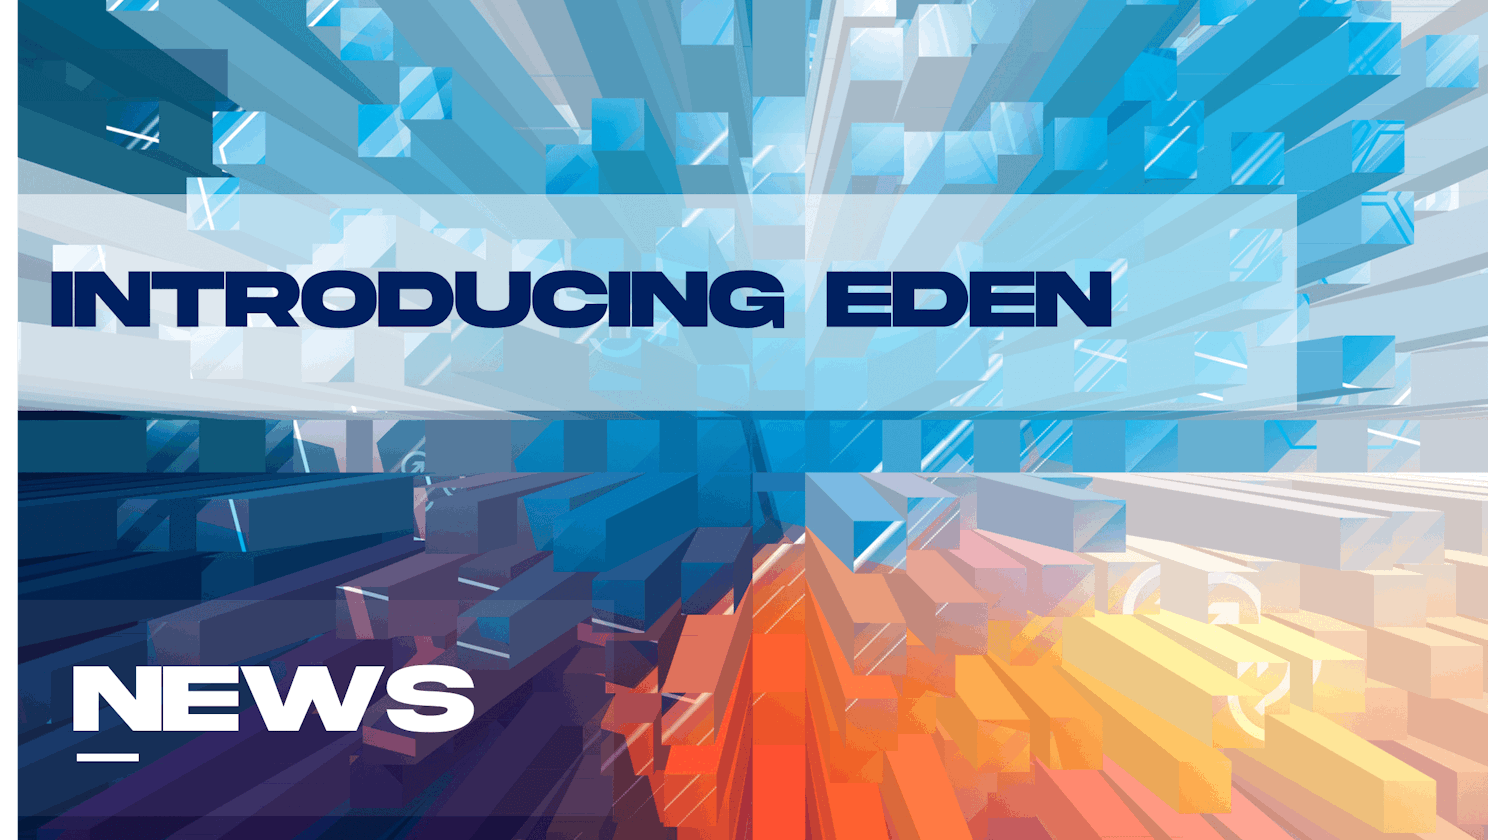 Introducing Eden: The Versatile and Adaptable AI with Real-Time Learning Capabilities